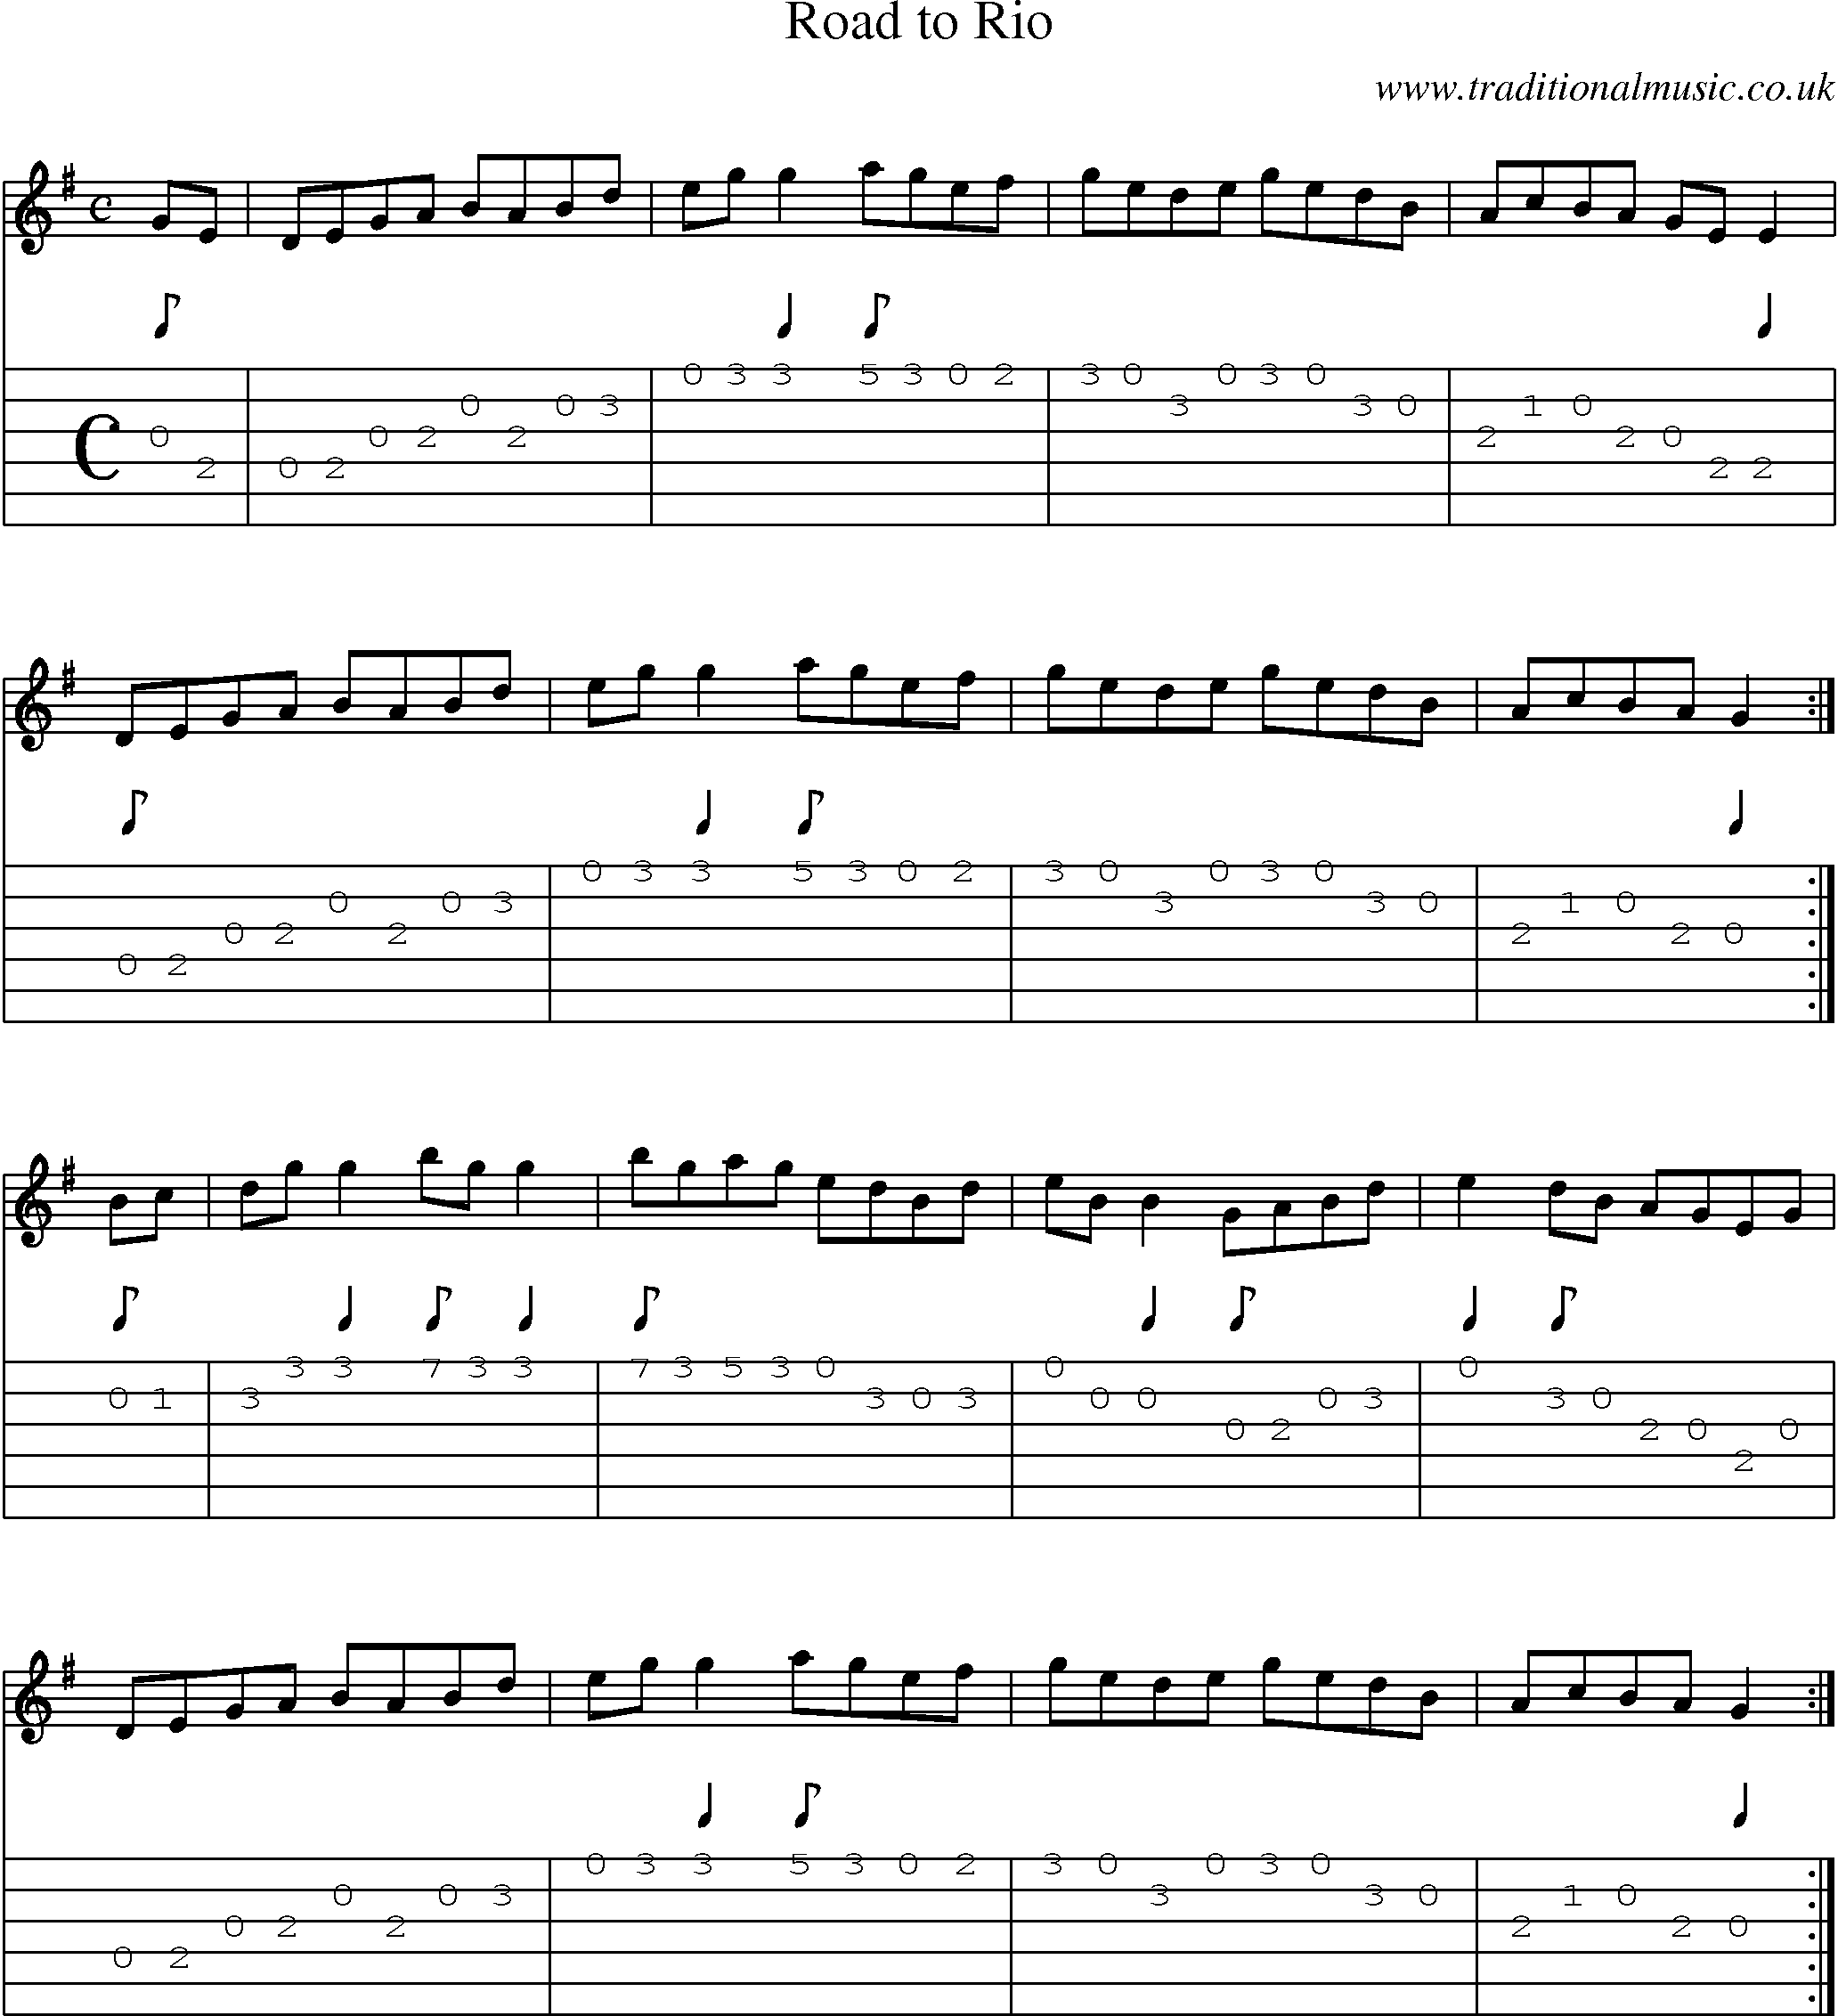 Music Score and Guitar Tabs for Road To Rio